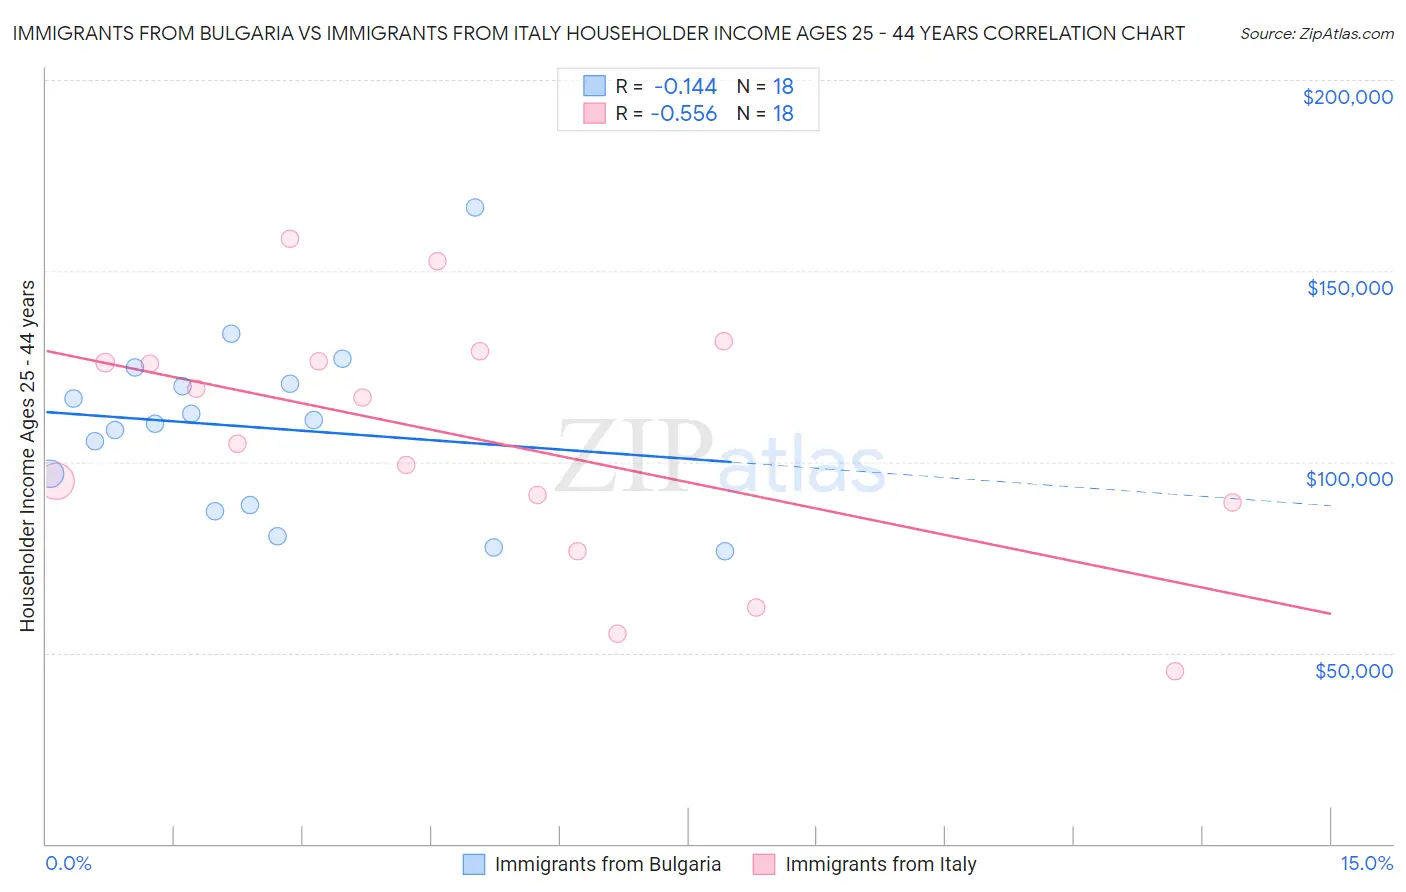 Immigrants from Bulgaria vs Immigrants from Italy Householder Income Ages 25 - 44 years